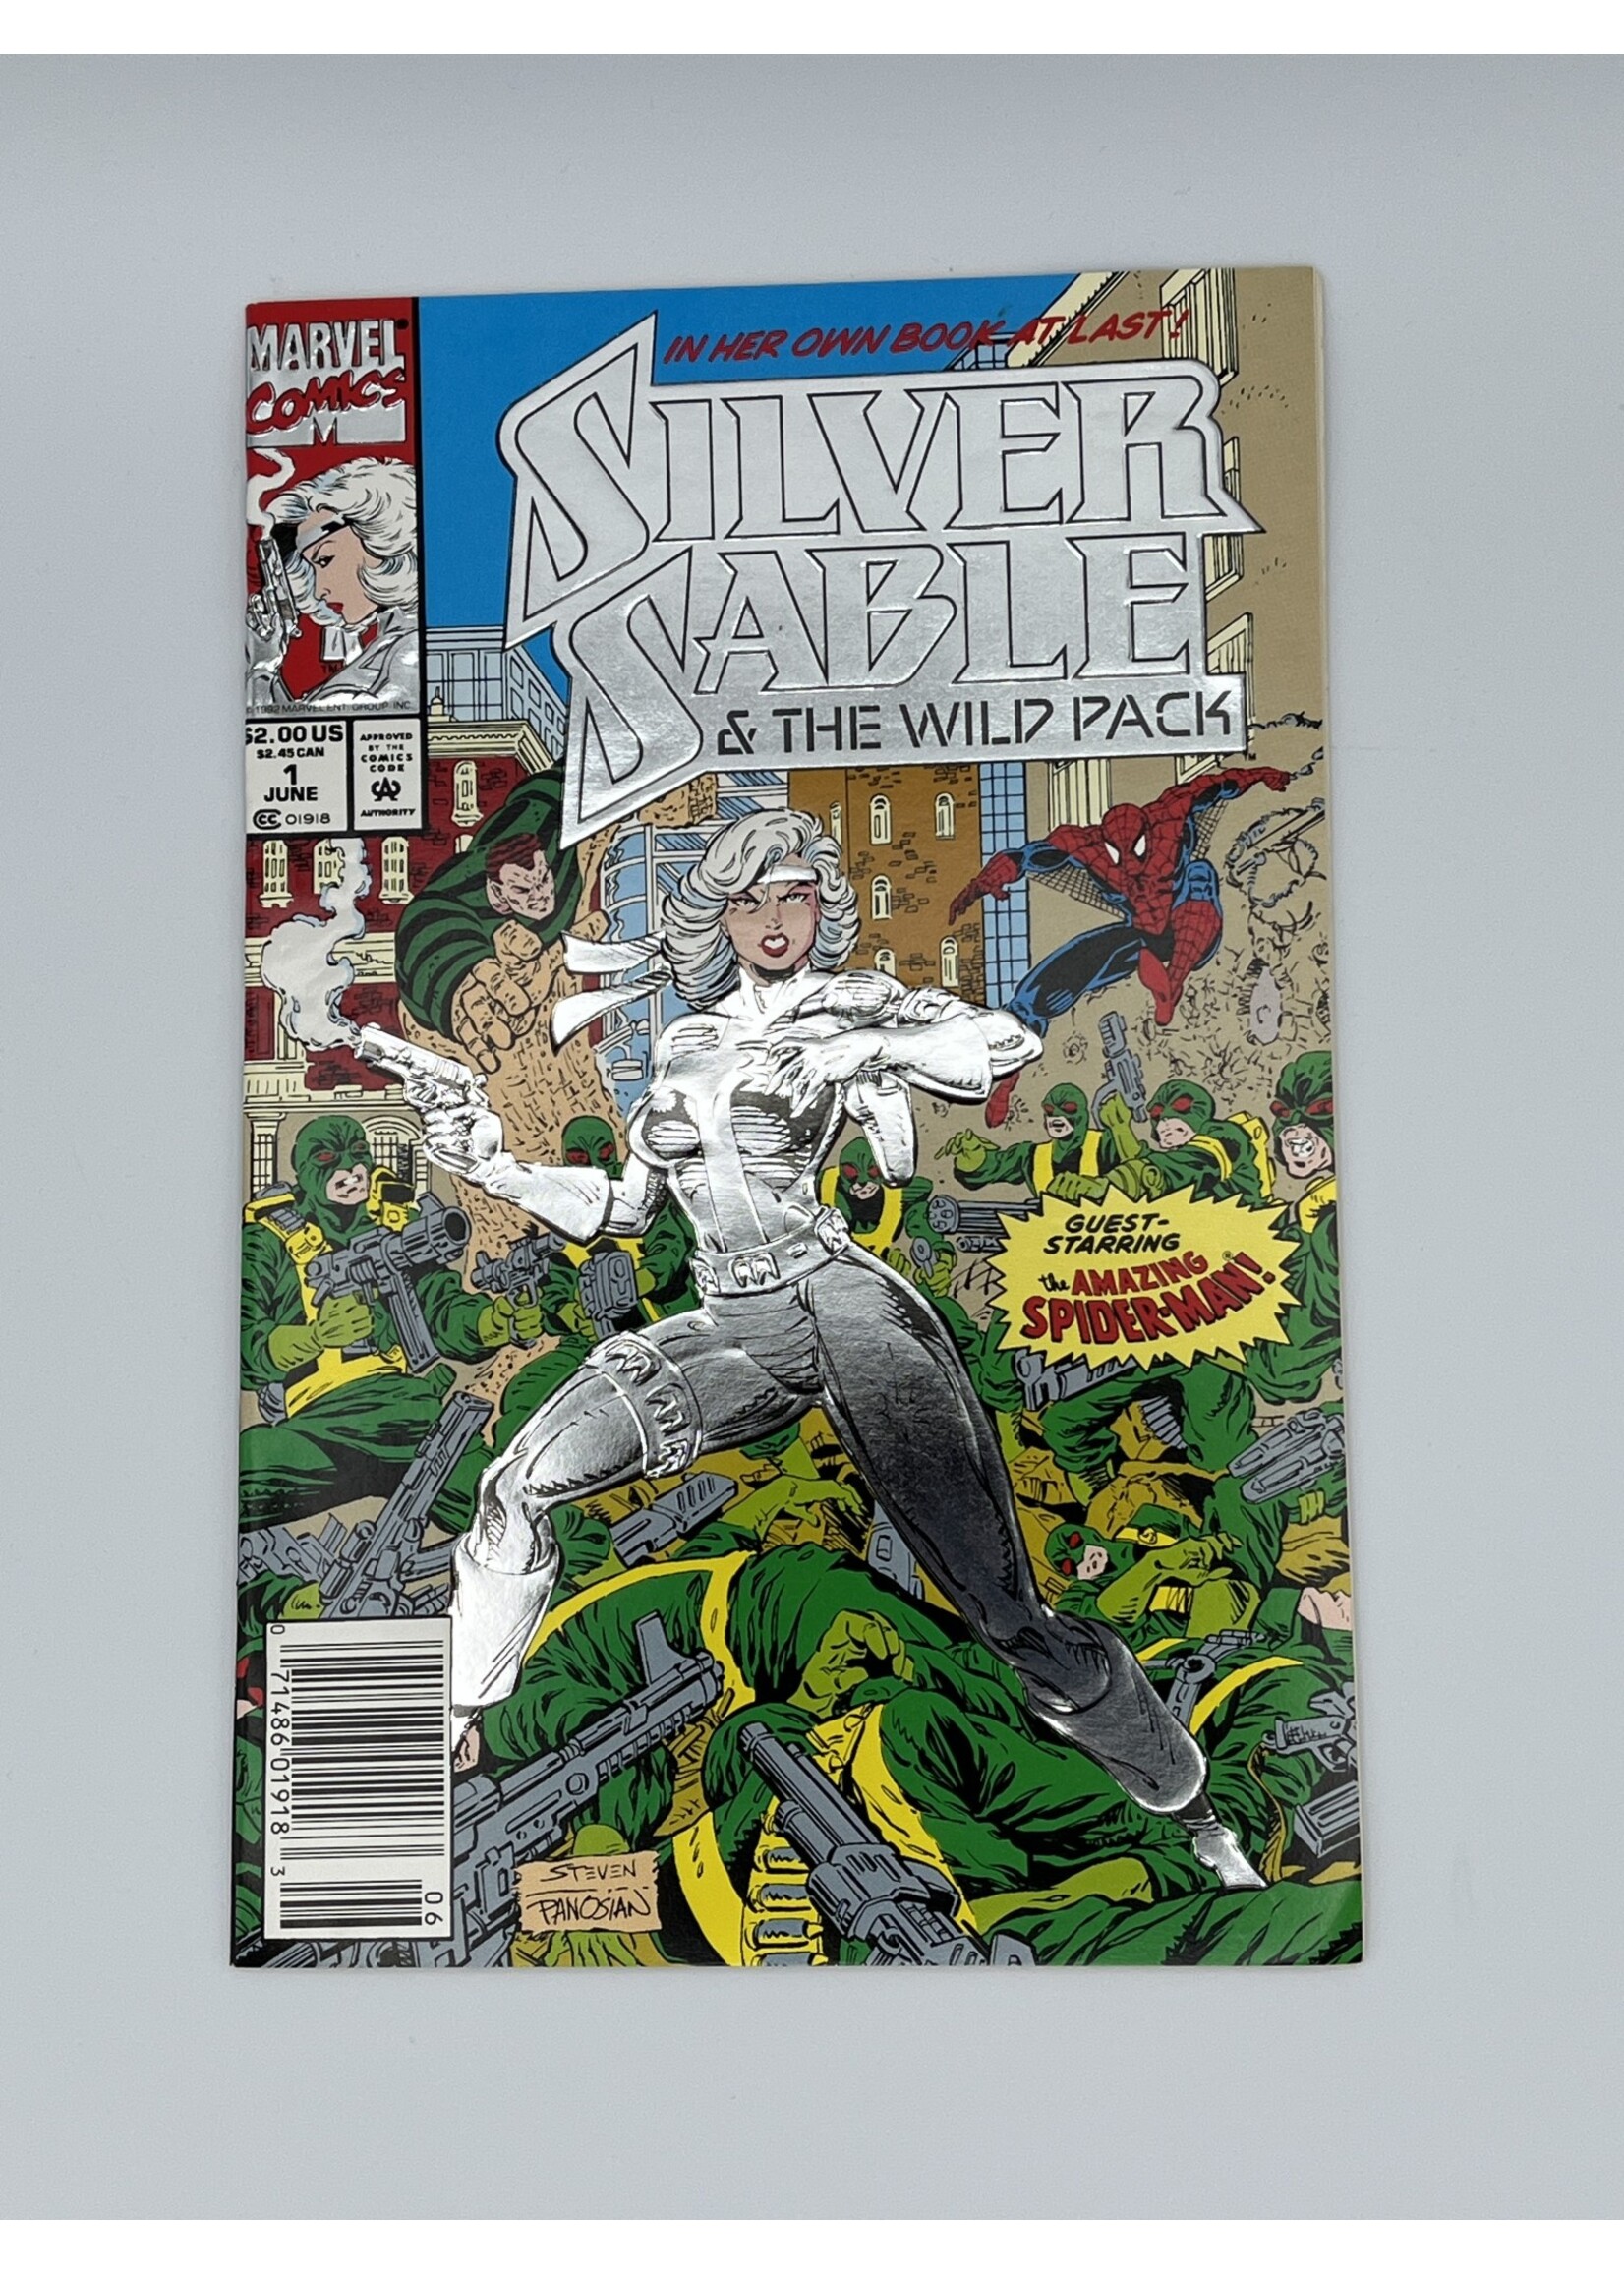 Marvel SILVER SABLE And THE WILD PACK #1 Marvel June 1992